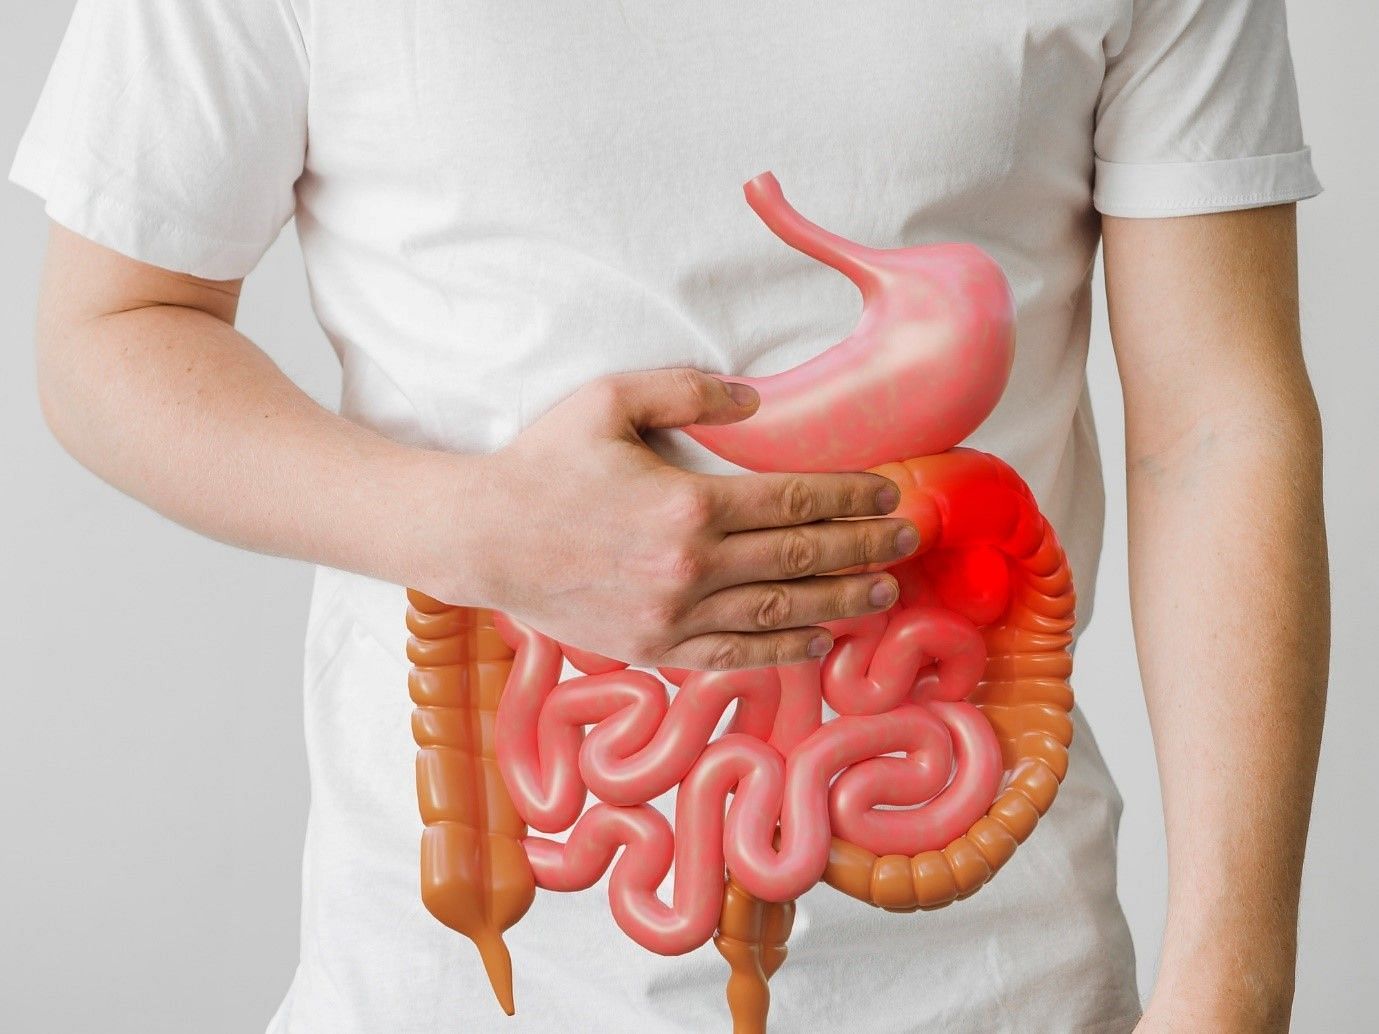 Colon cancer is an increasing threat and research is underway to find a cure (Image by Freepik on Freepik)